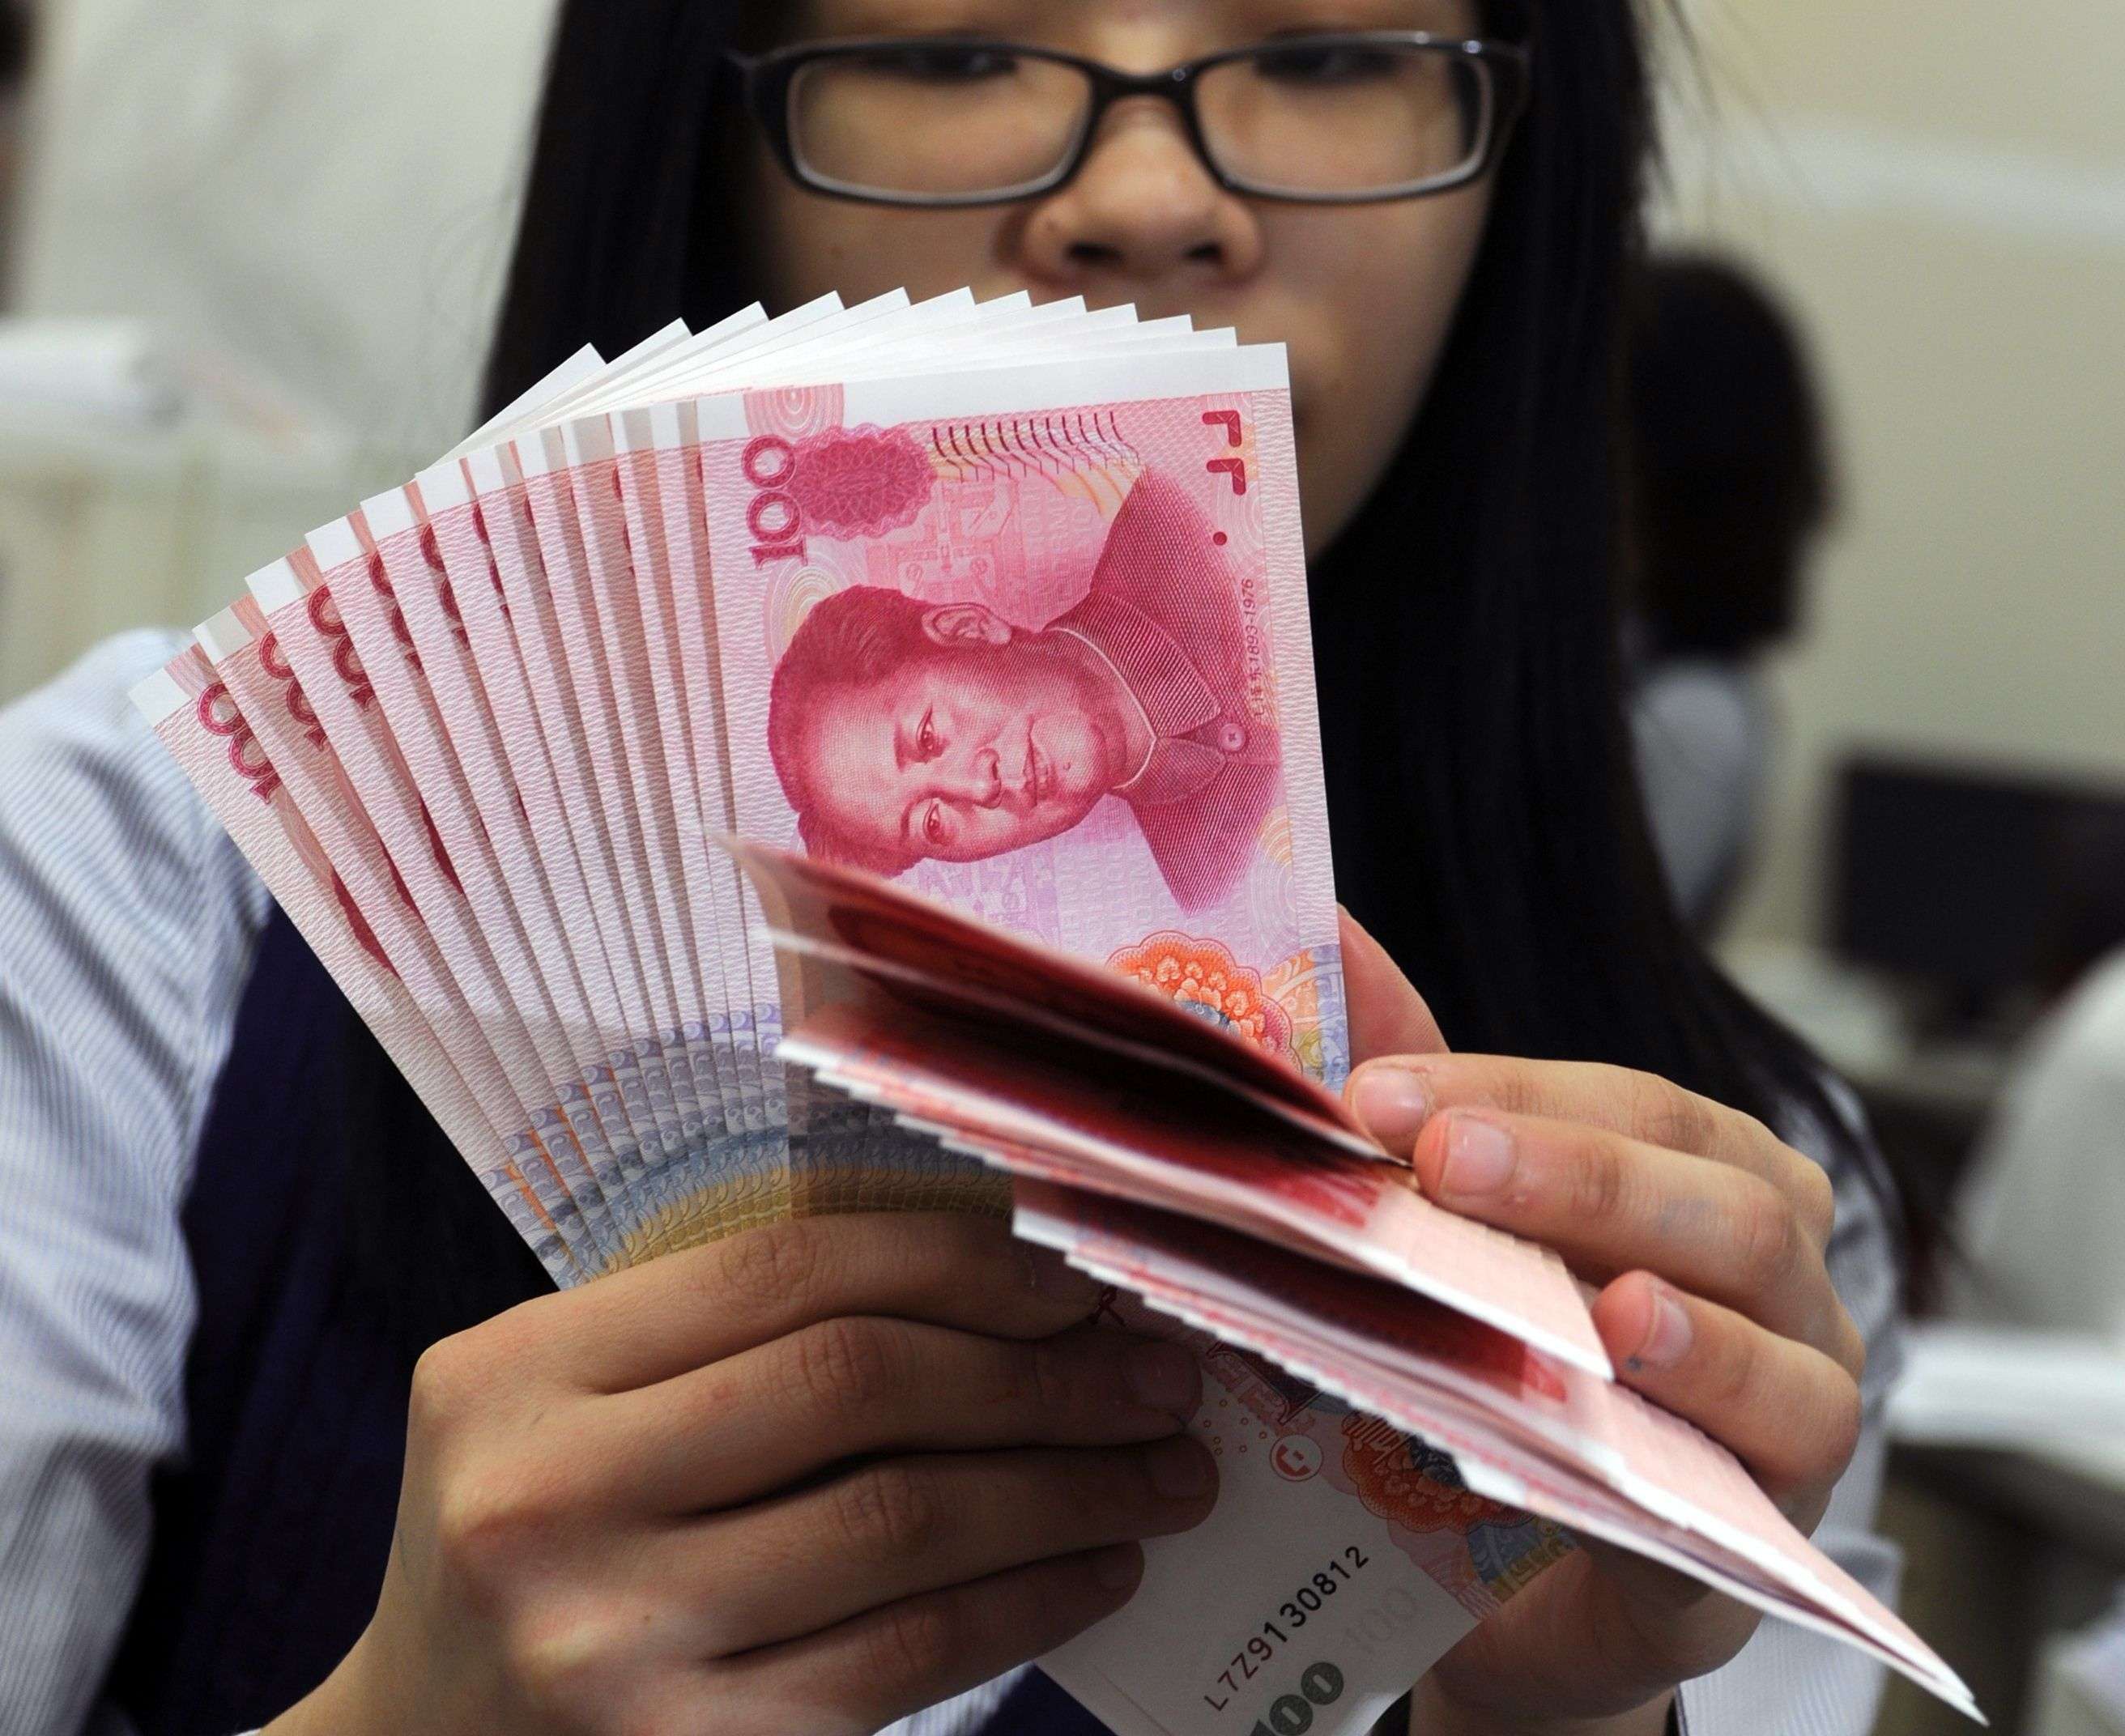 As the largest bond market in the Asia ex-Japan region, China’s bond market has traditionally been dominated by high-yield supply from Chinese corporates. Photo: Sam Yeh